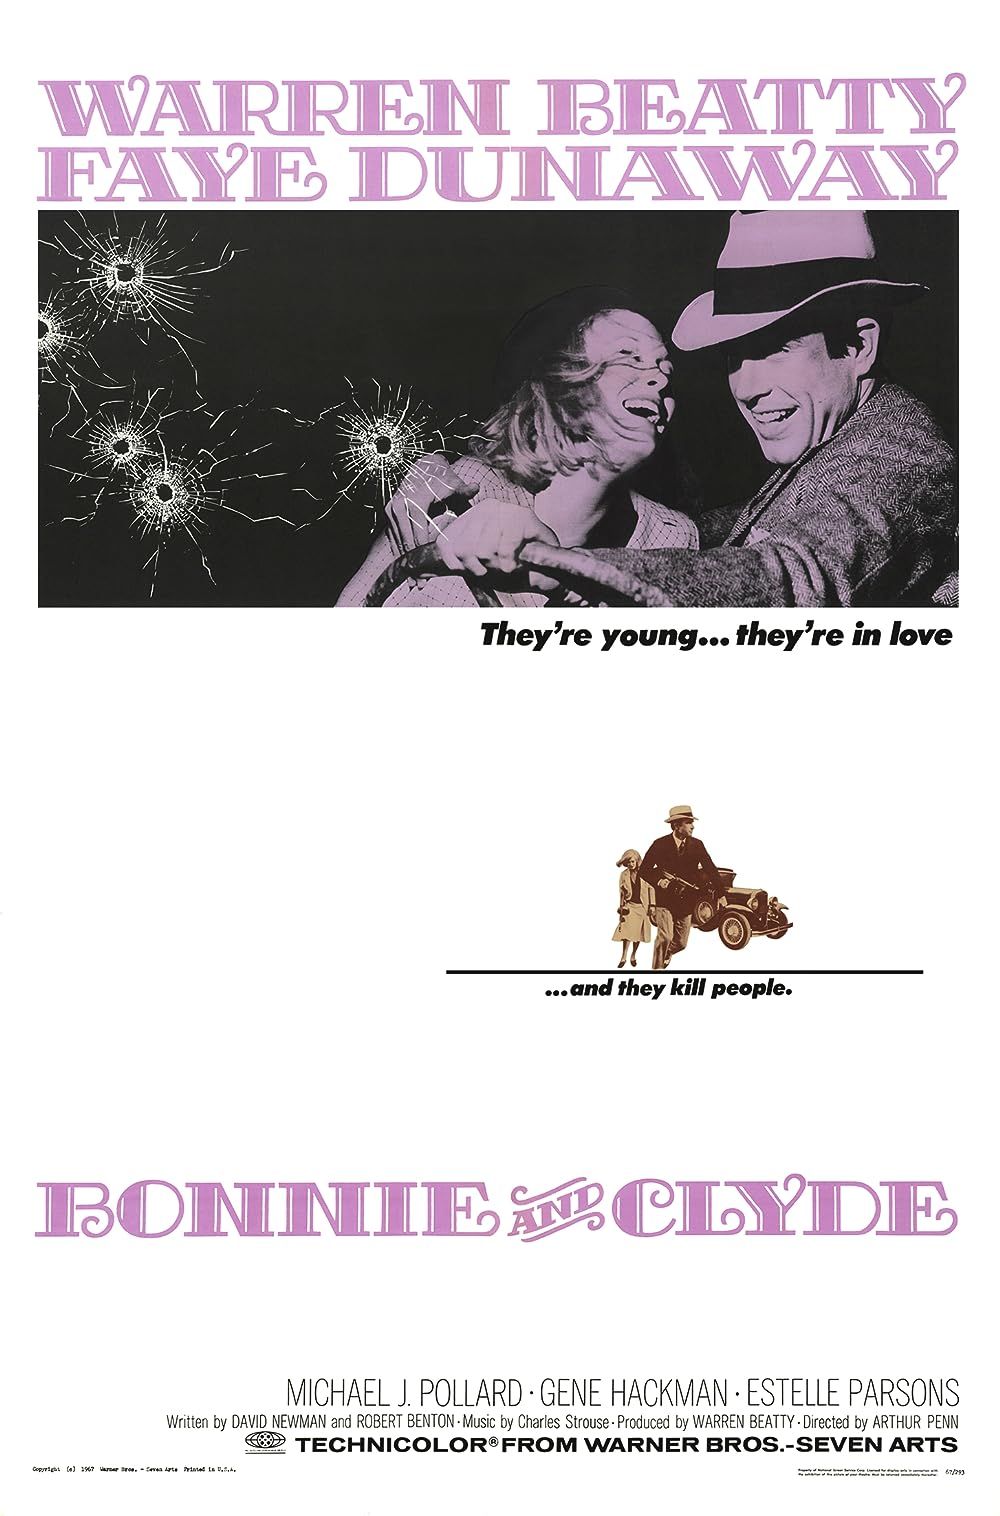 The poster for Bonnie and Clyde, featuring Bonnie and Clyde driving a car while being shot at